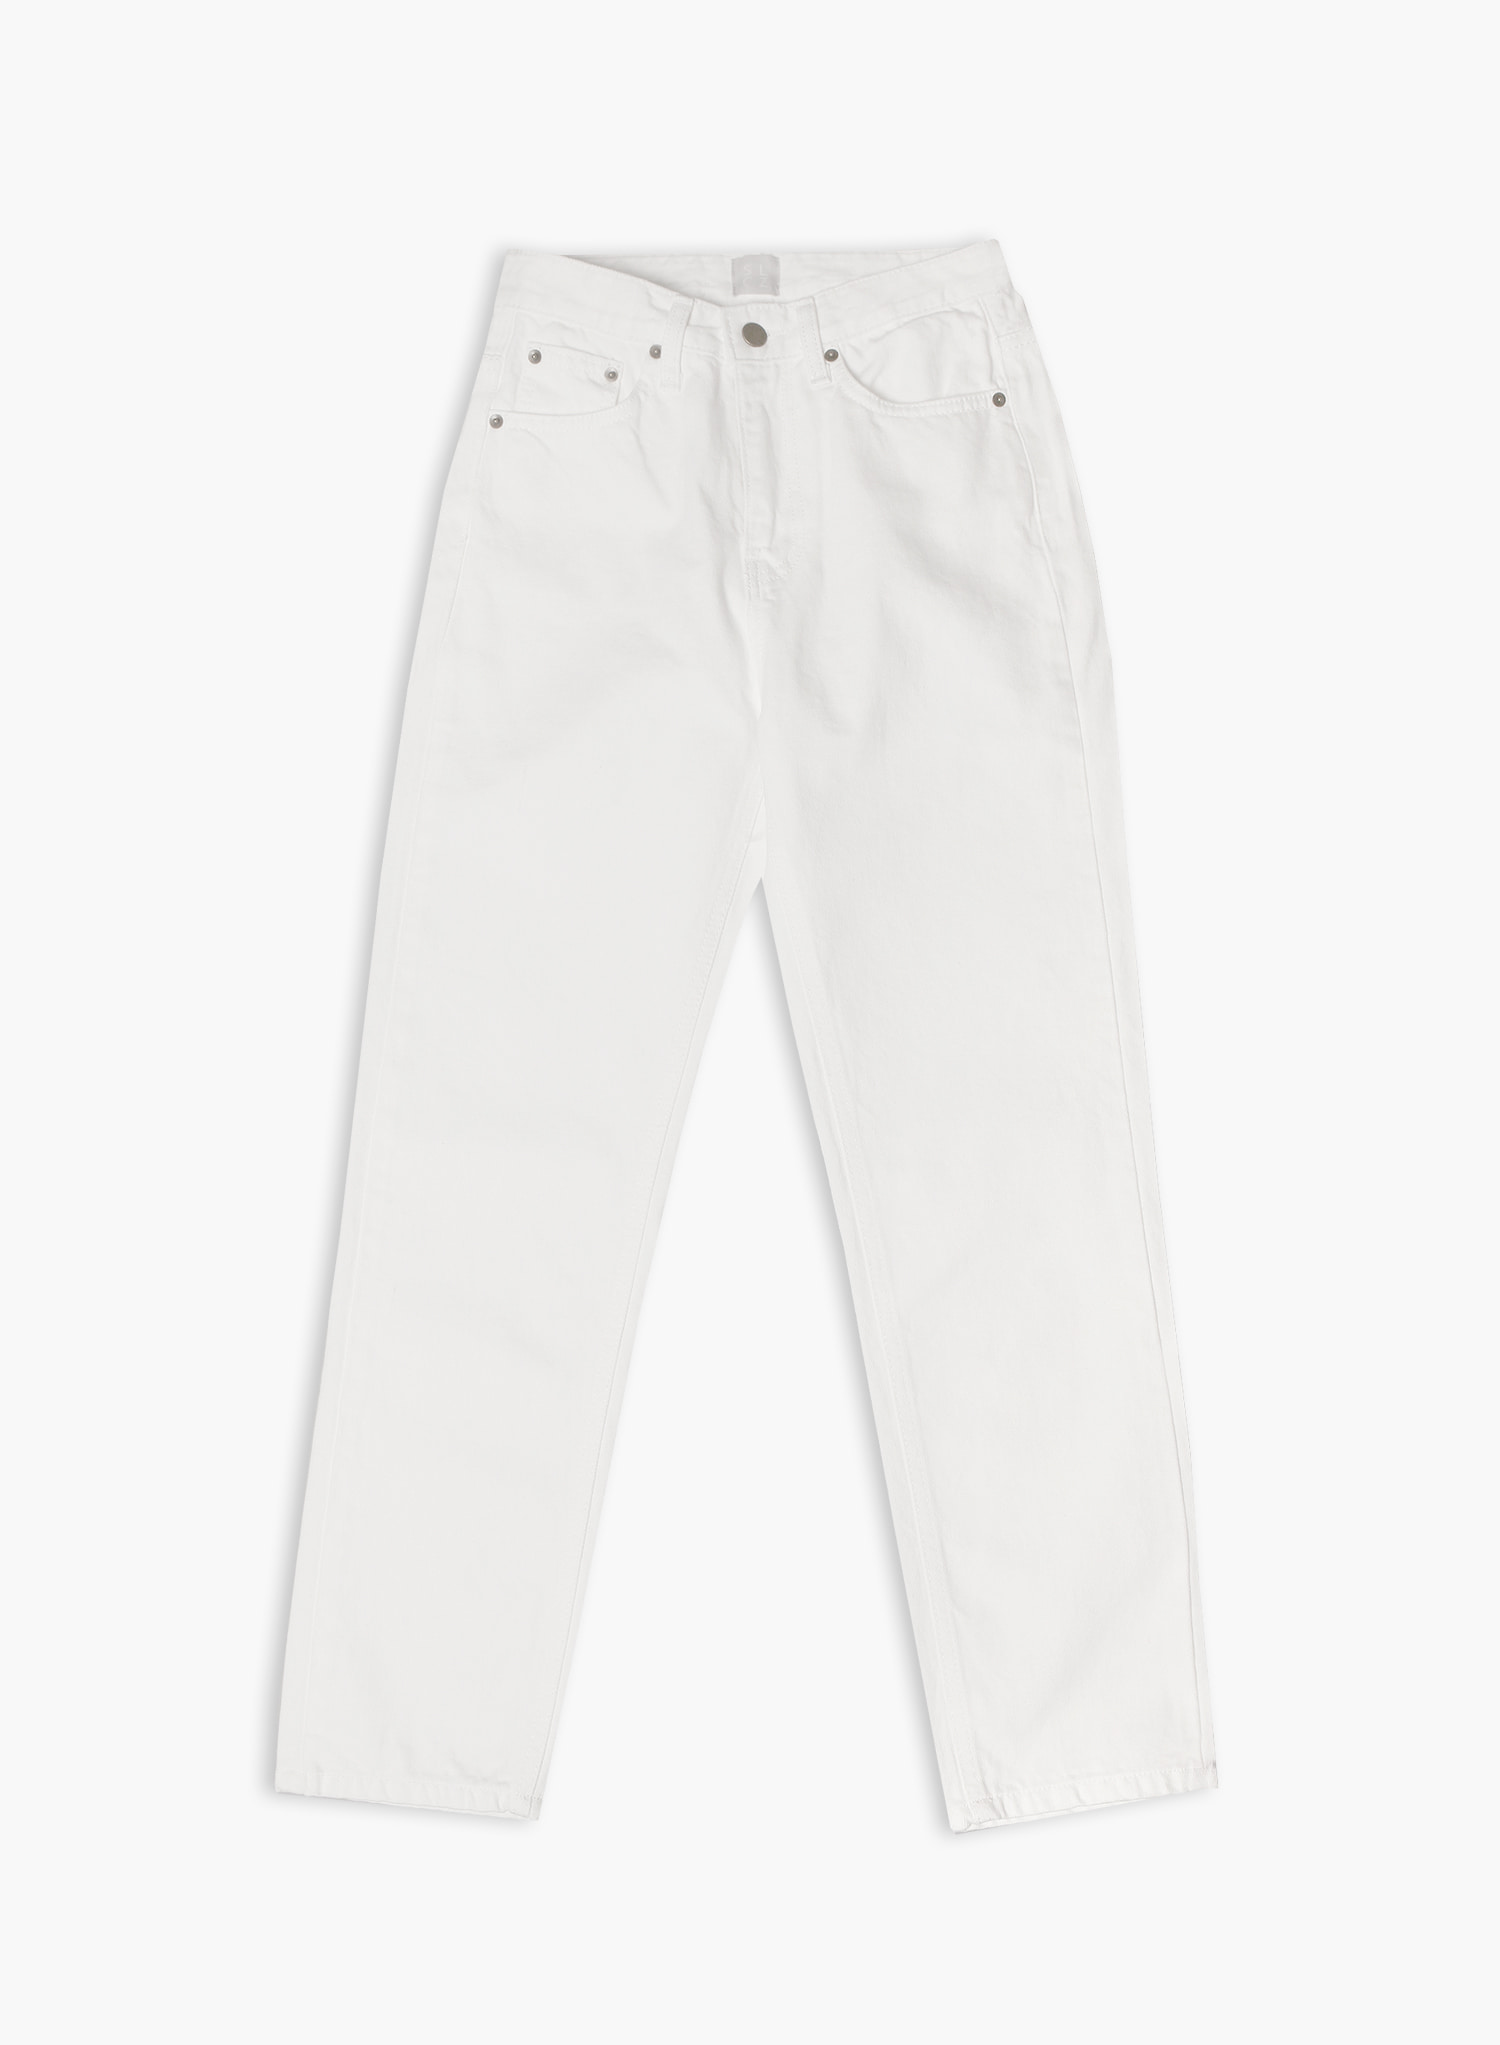 CLASSIC JEANS / WHITE